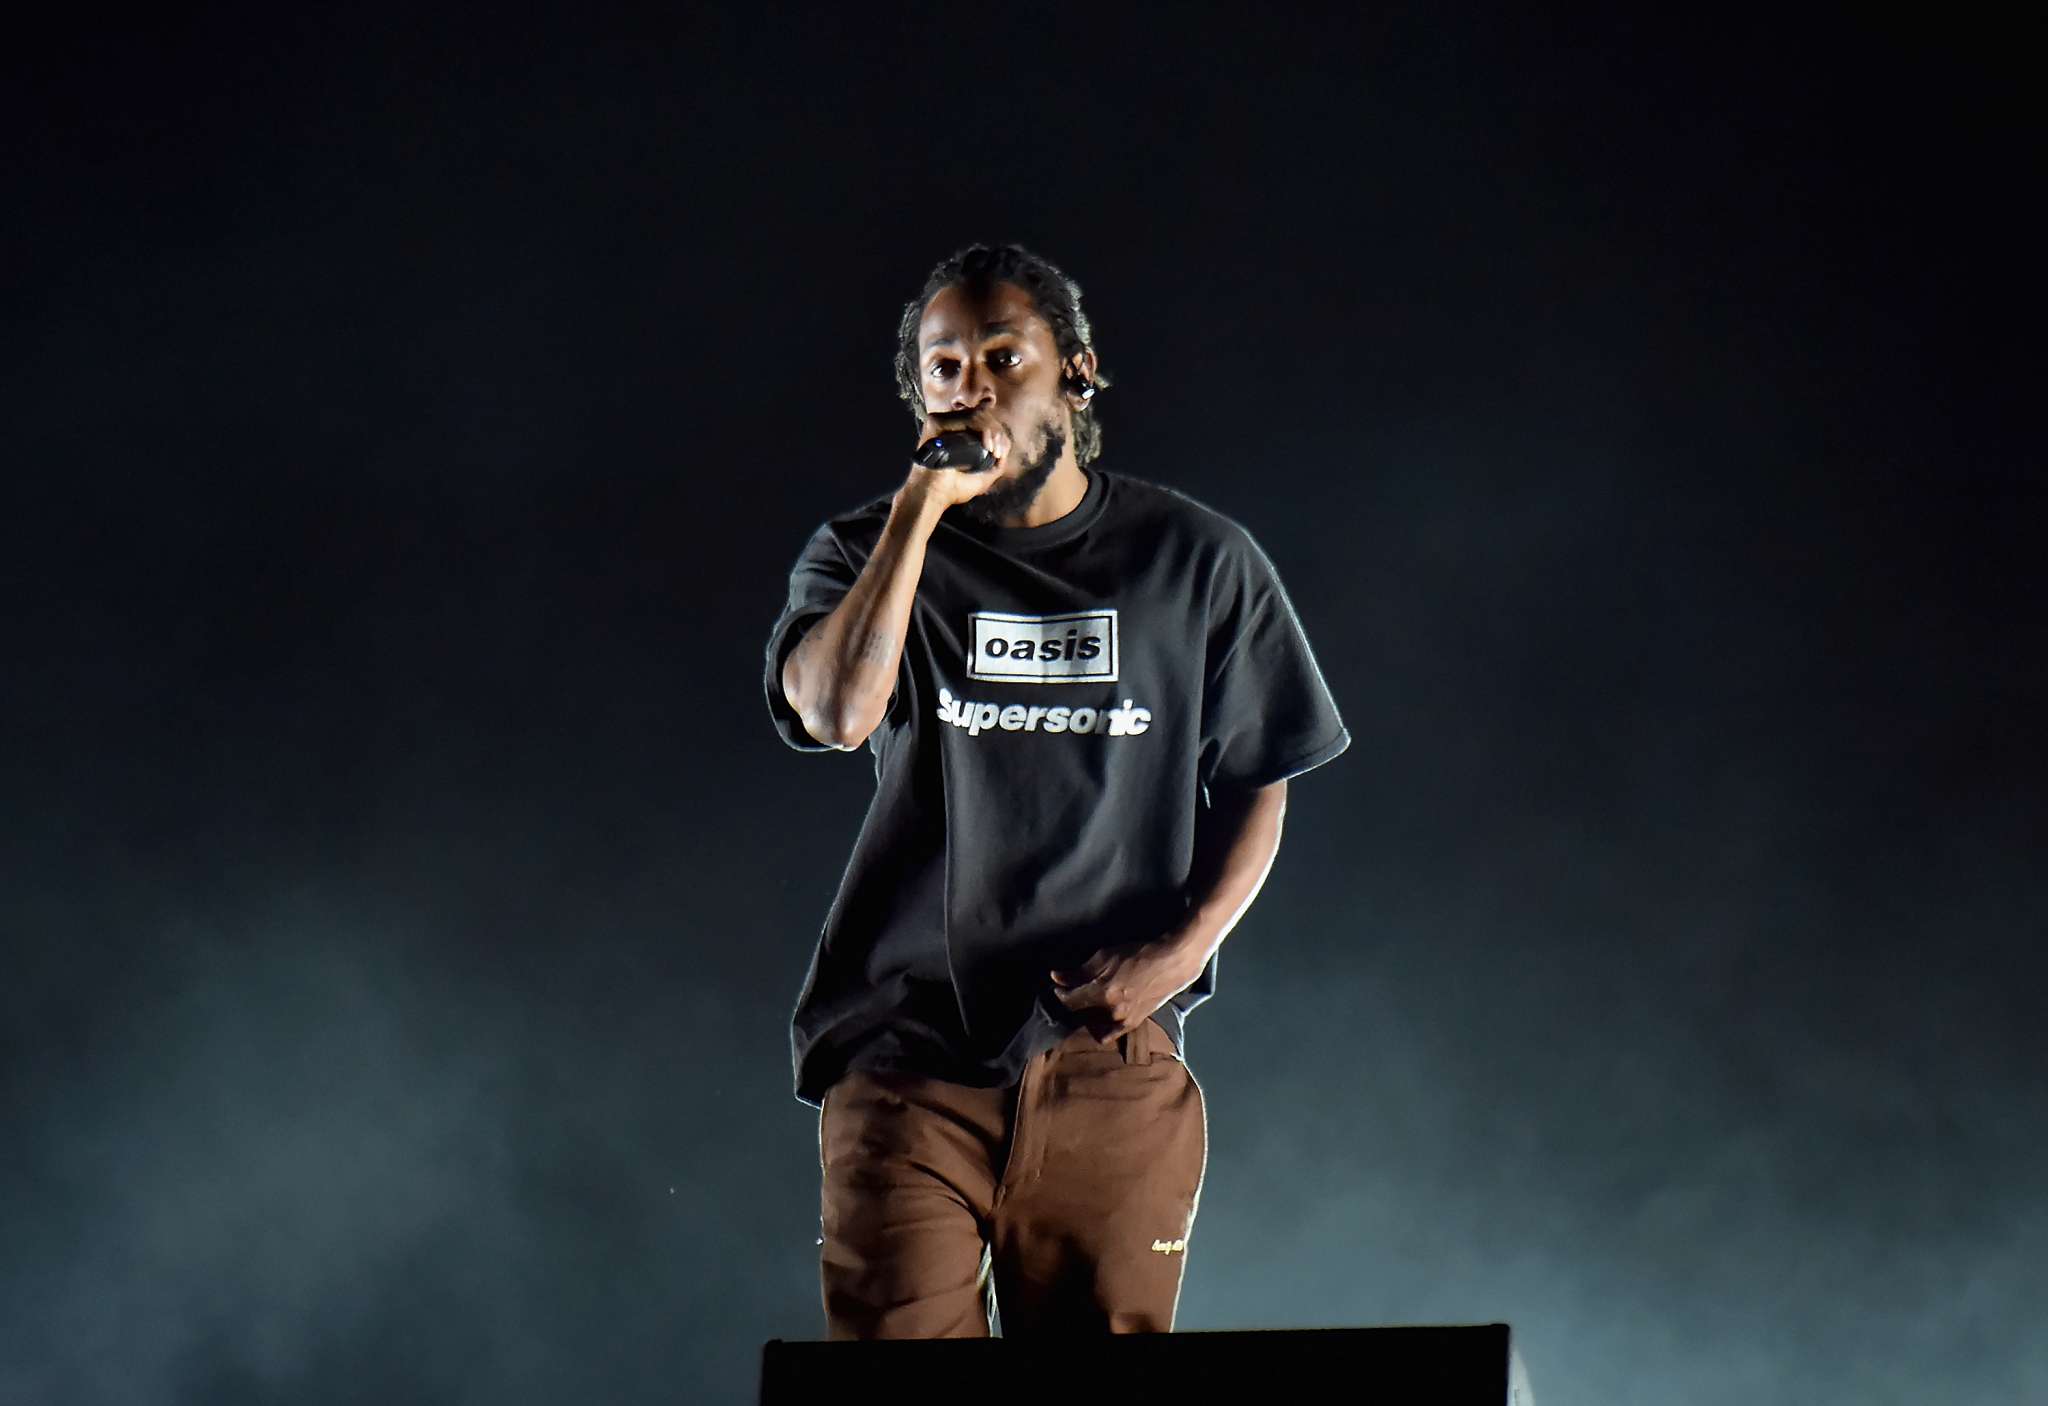 Kendrick Lamar is back with his first album in 5 years, Mr. Morale & The Big Steppers.